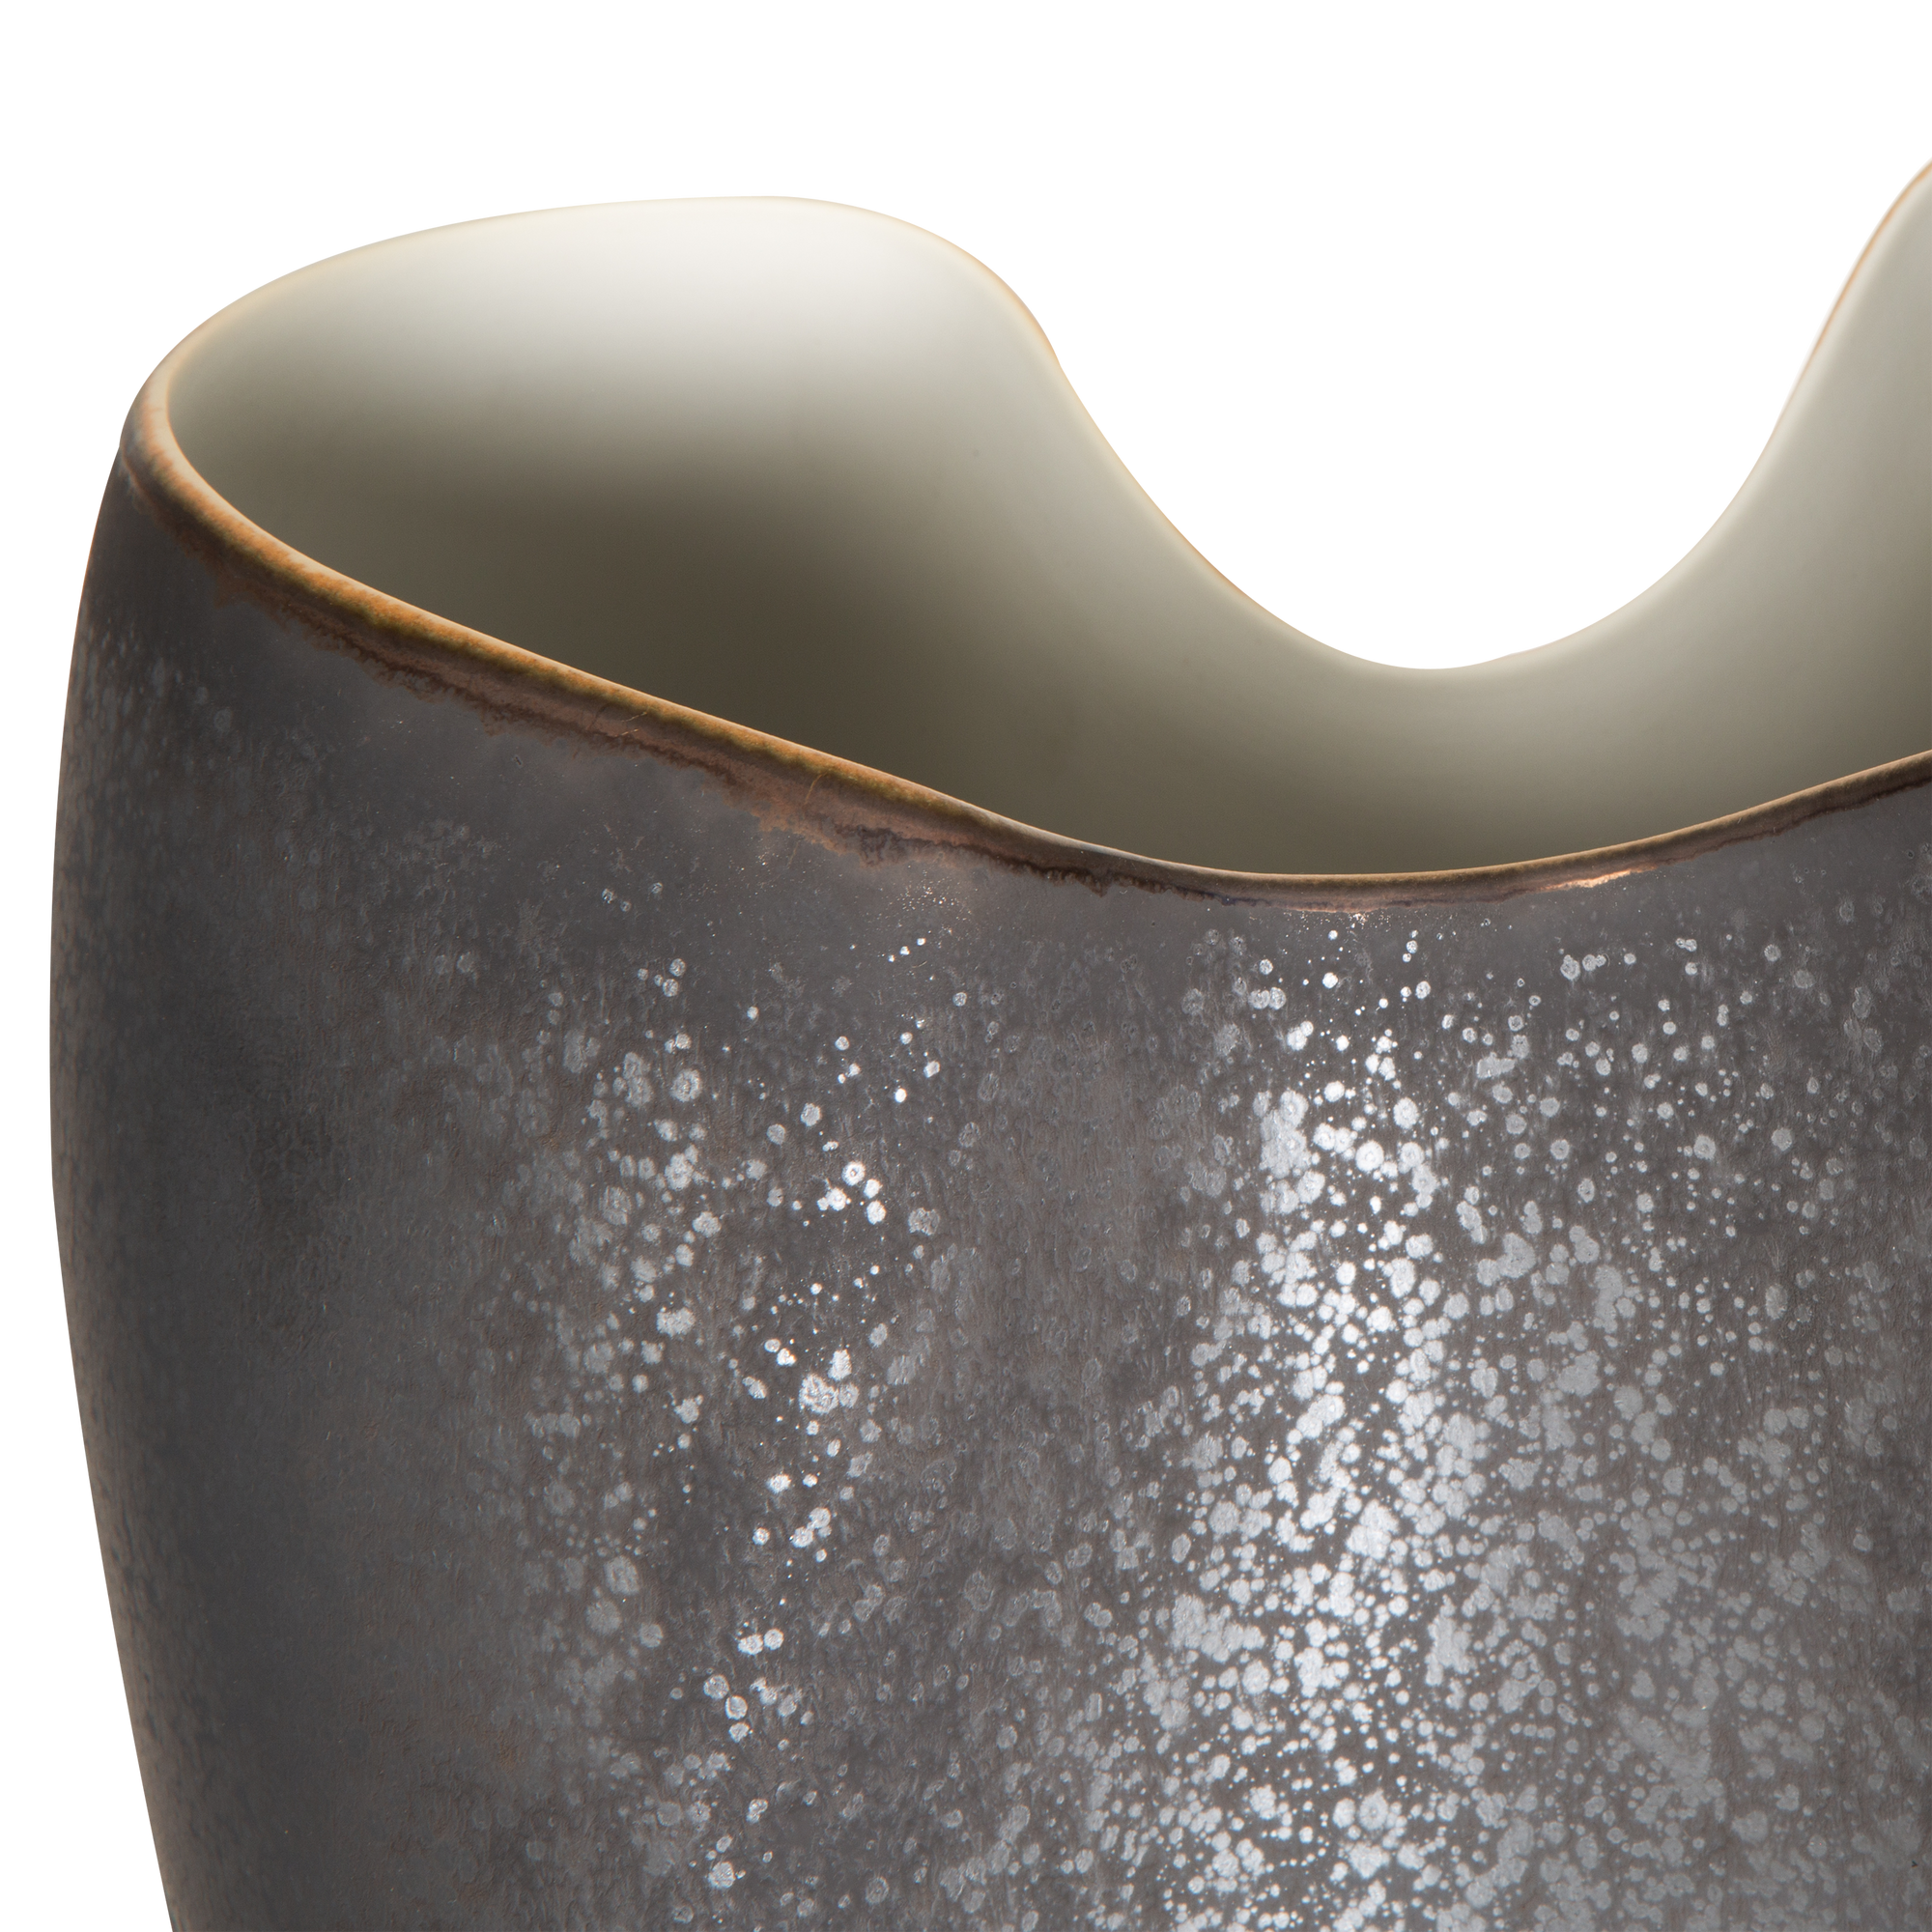 Expertly crafted and exceptionally captivating, the Oxus Vase feature a highly reactive Raku-like glaze on porcelain.